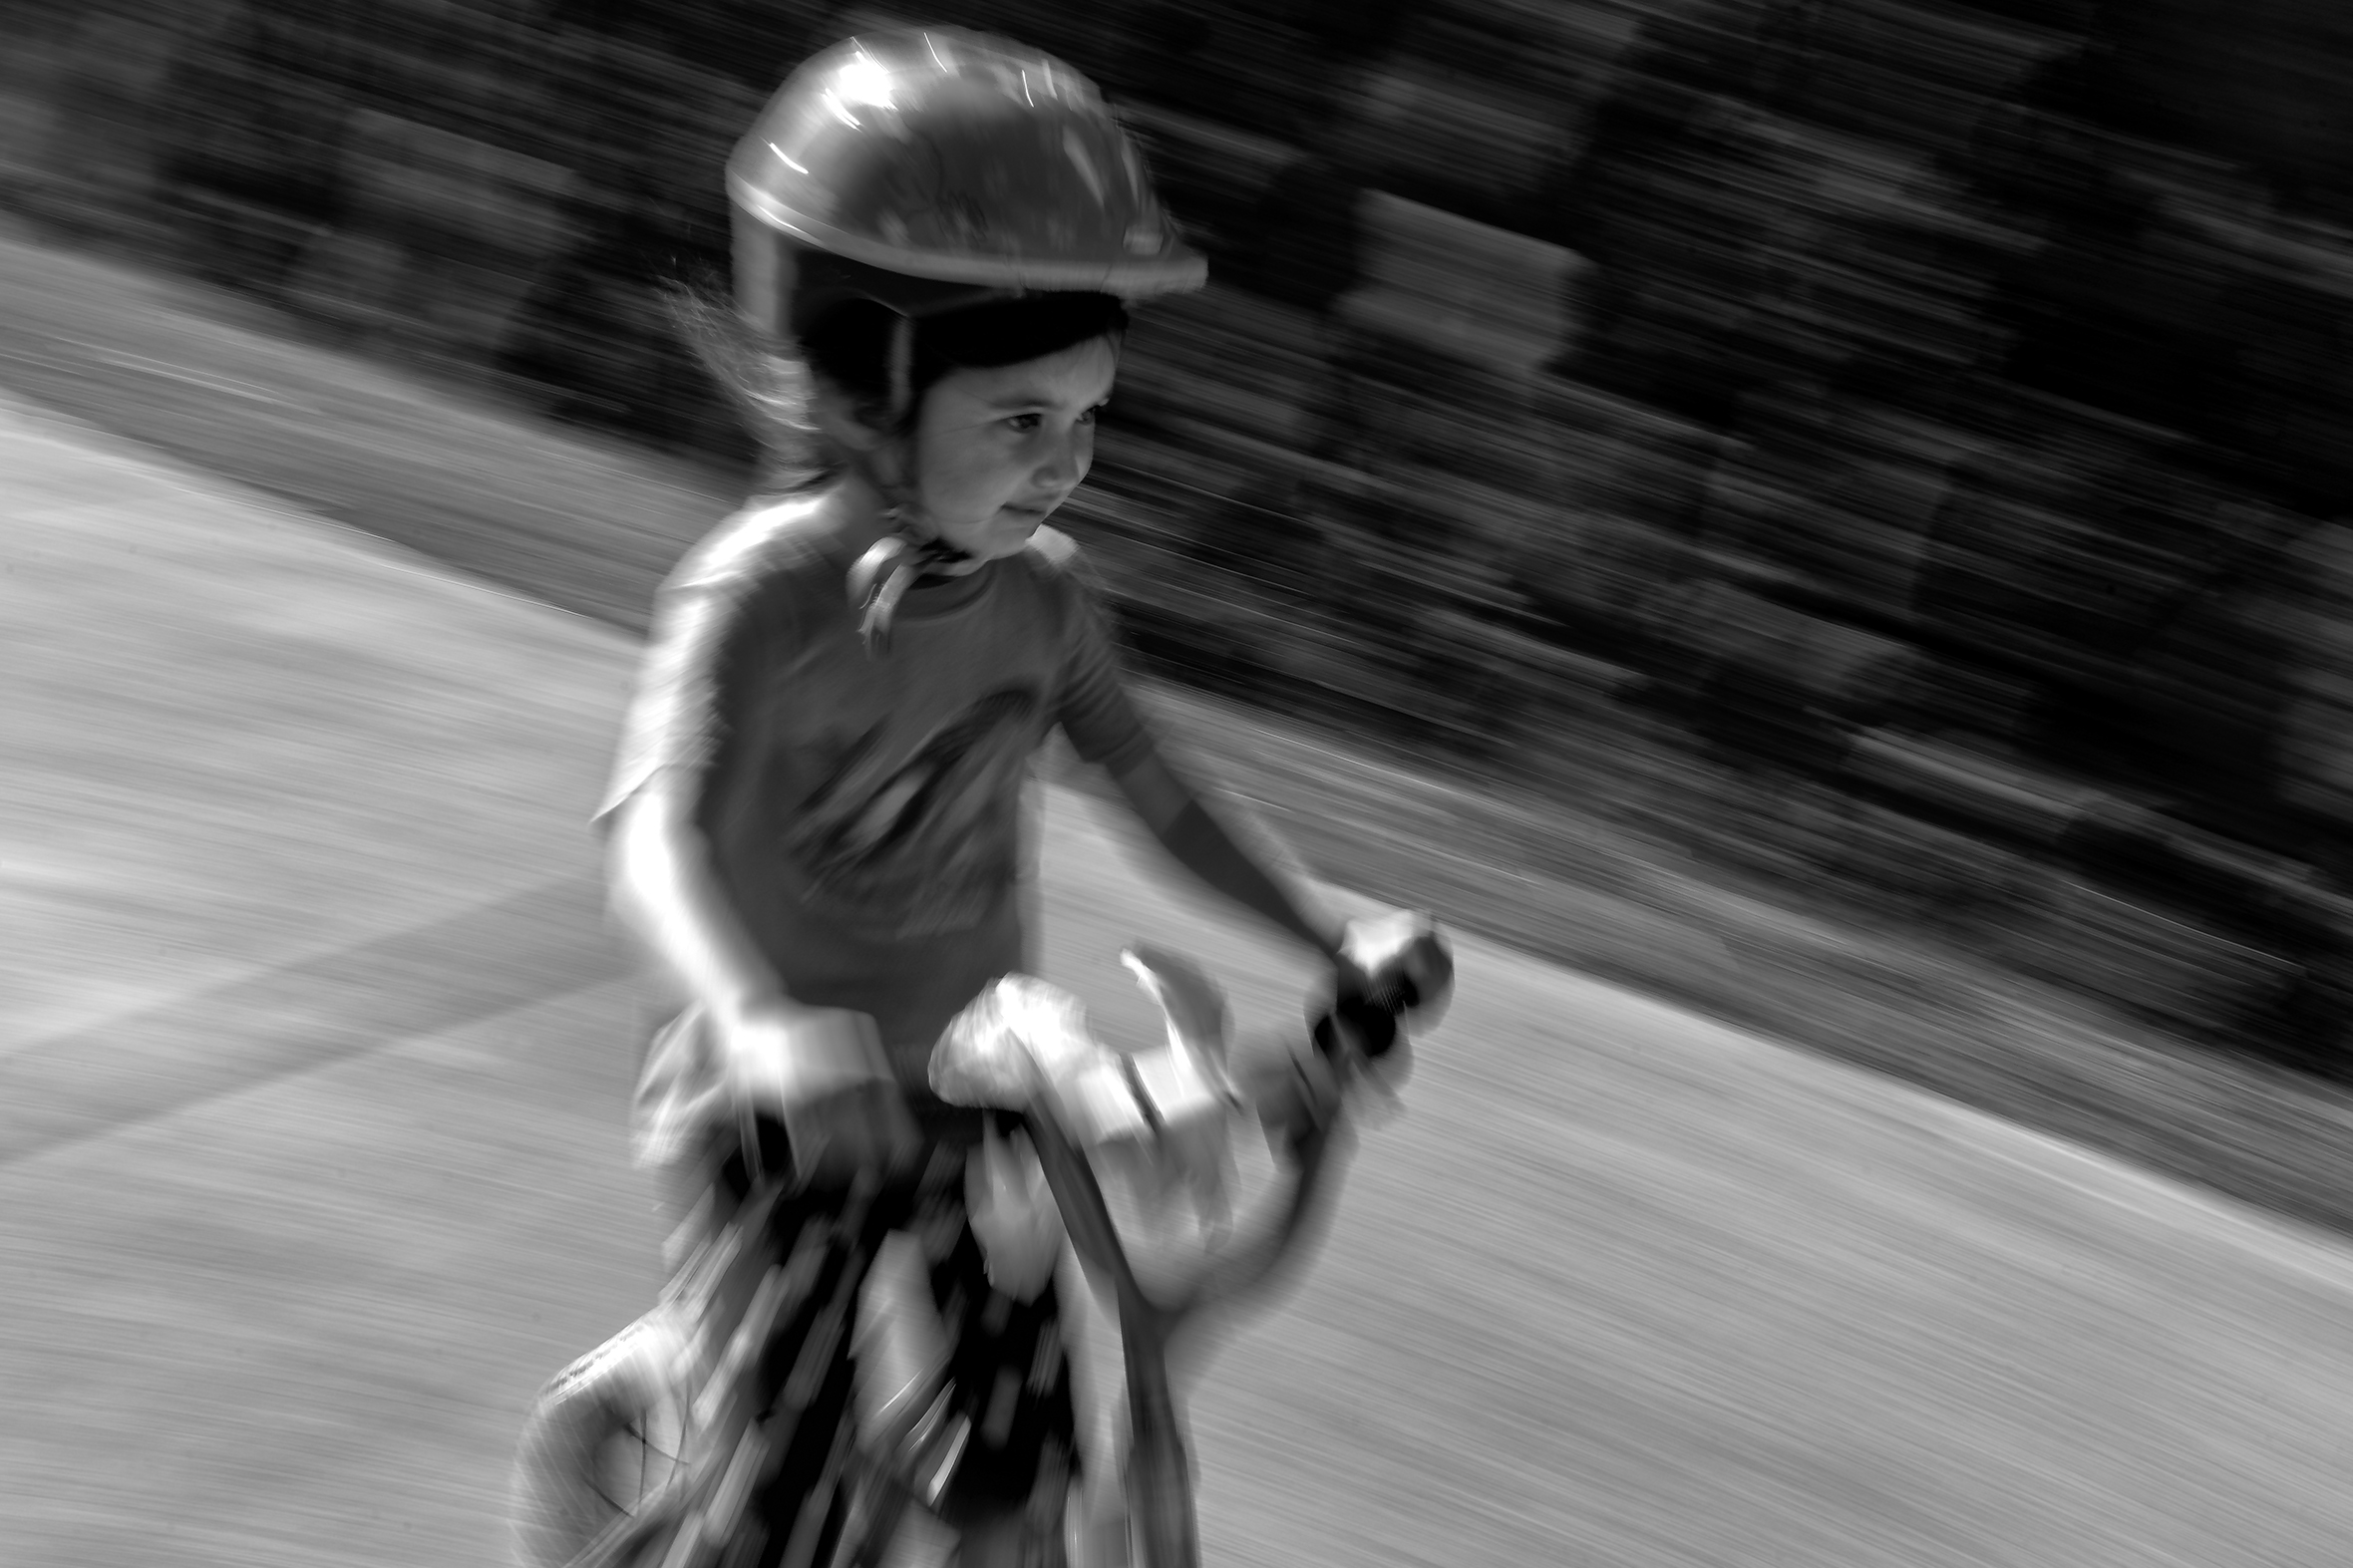 A young girl wearing a helmet, who looks as though she is concentrating, is riding a bike. Her face is clear, but the rest of the photo is motion blurred.